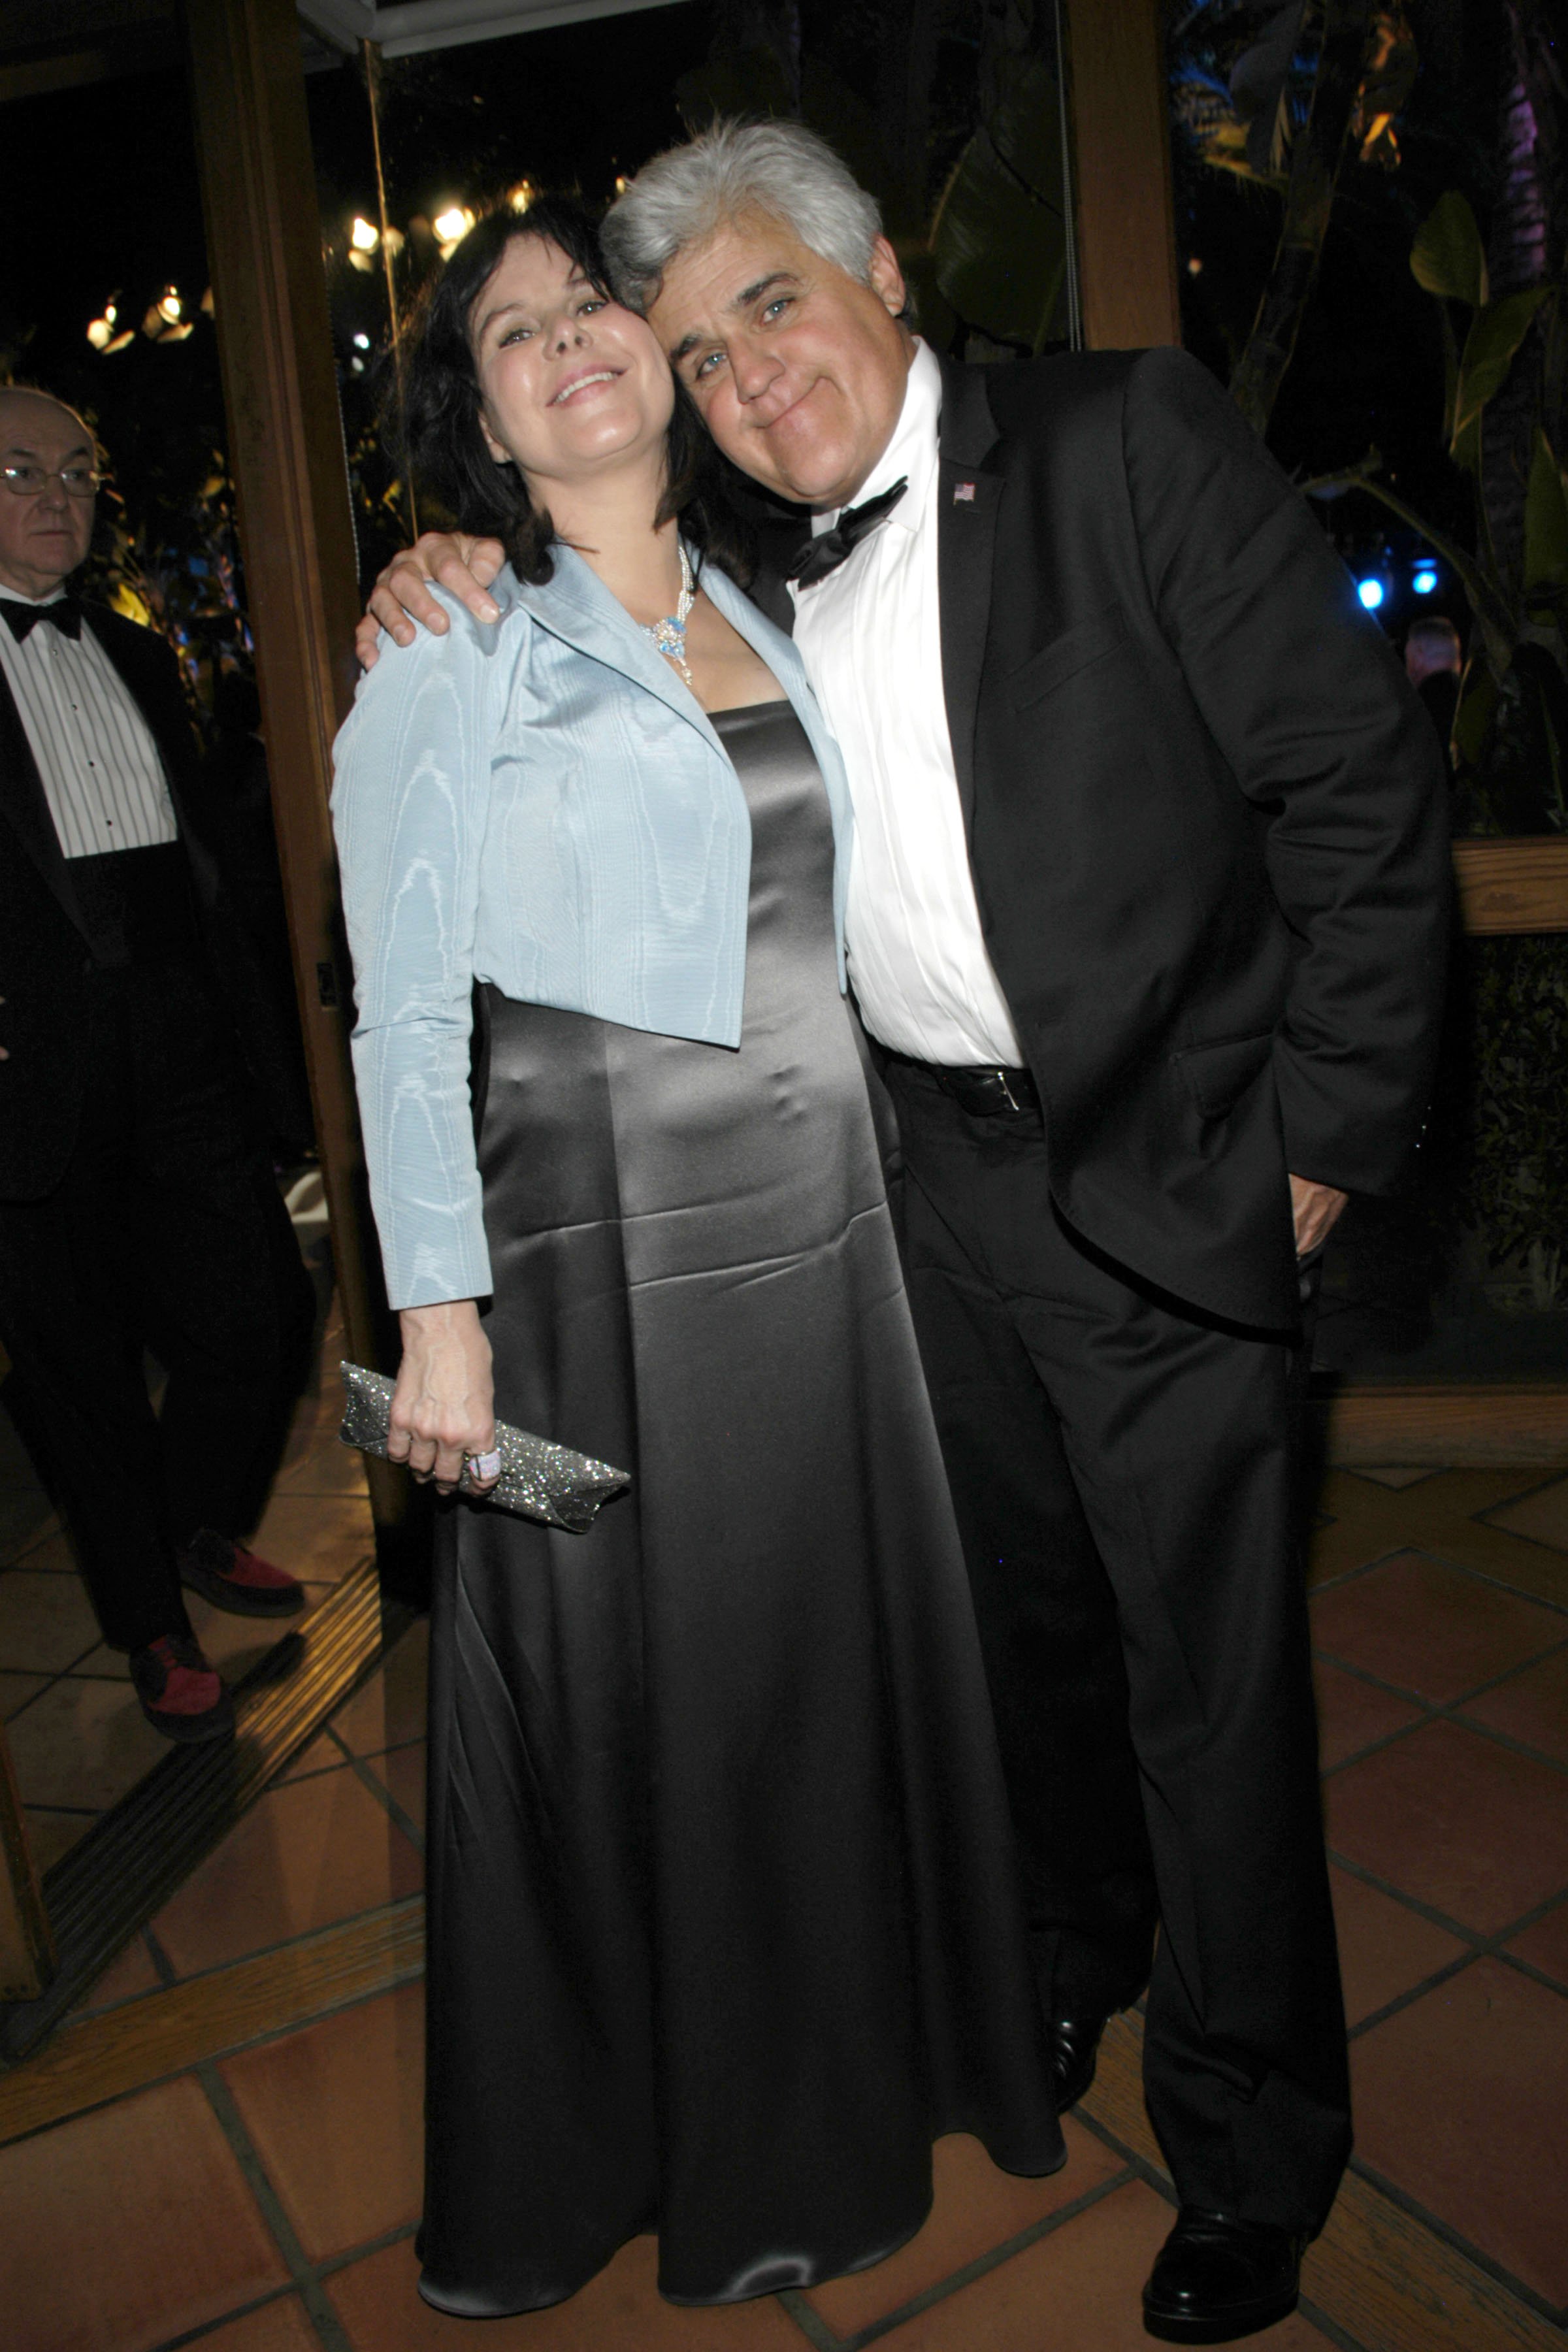 Mavis Leno and Jay Leno attend VANITY FAIR Oscar Party at Morton's on February 25, 2007 in Los Angeles, CA. | Source: Getty Images